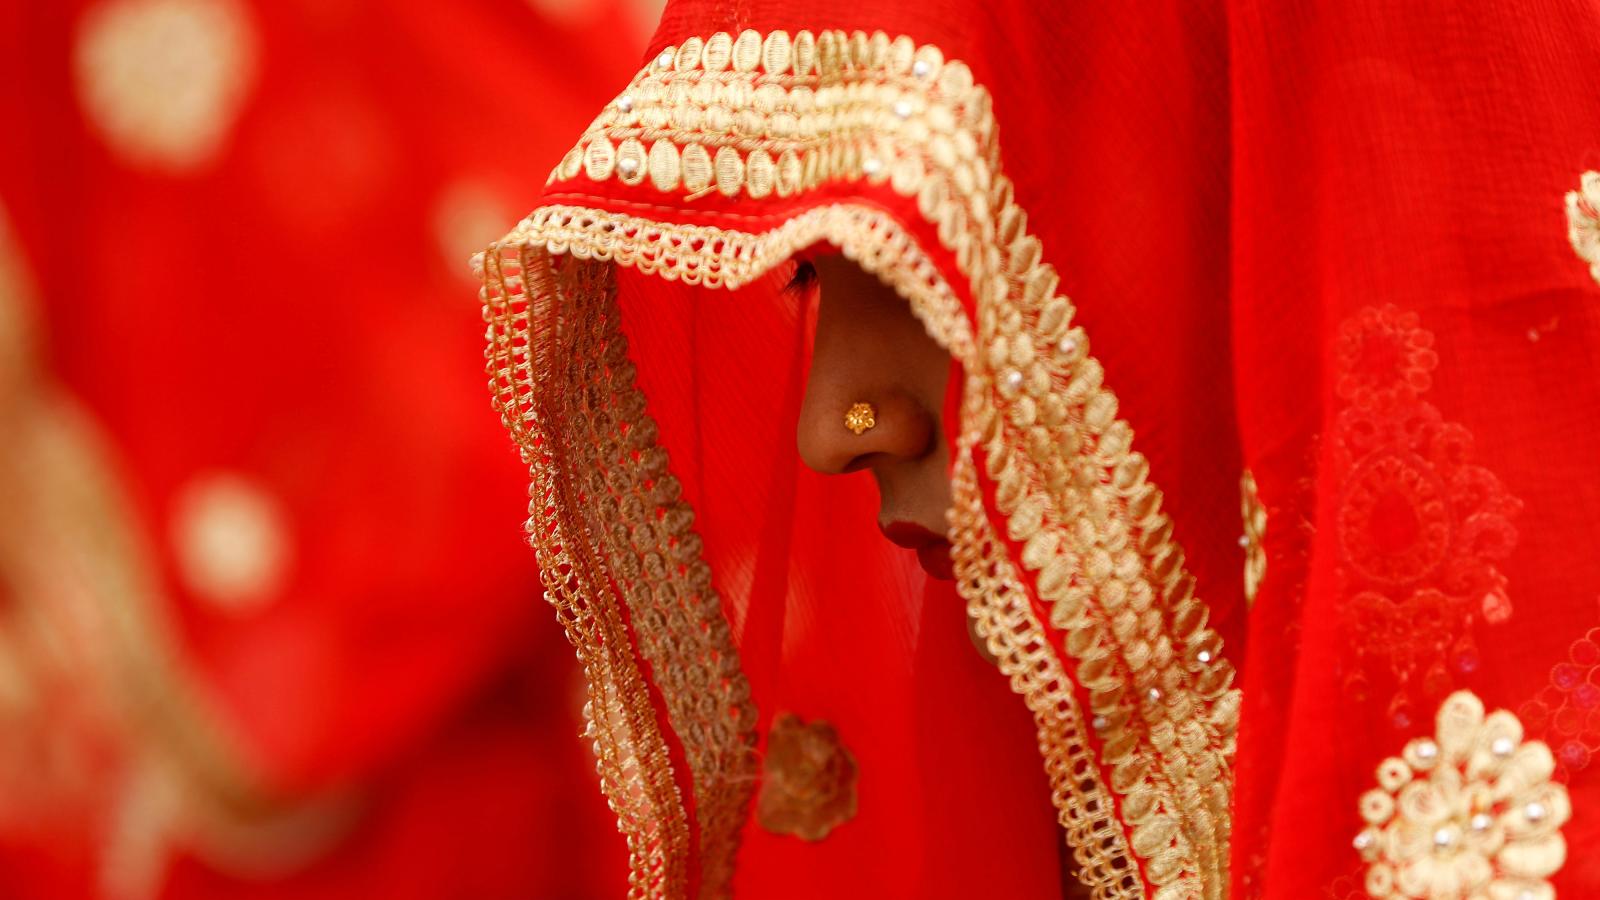 Forced marriage in Pakistan: “I met him on Monday. On Tuesday, my